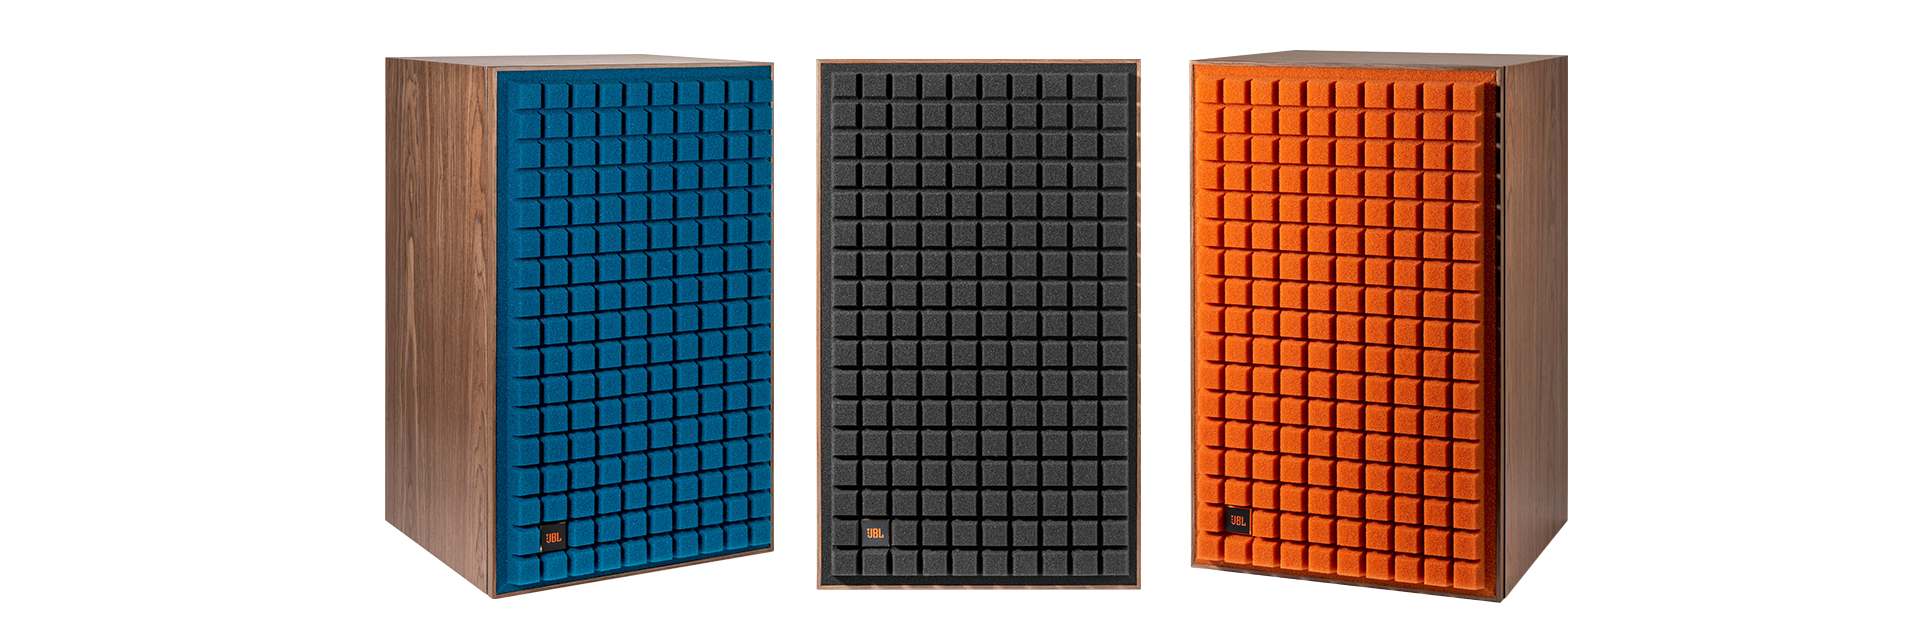 Retro design with iconic JBL styling and vintage Quadrex foam grille in a choice of black, orange, or blue